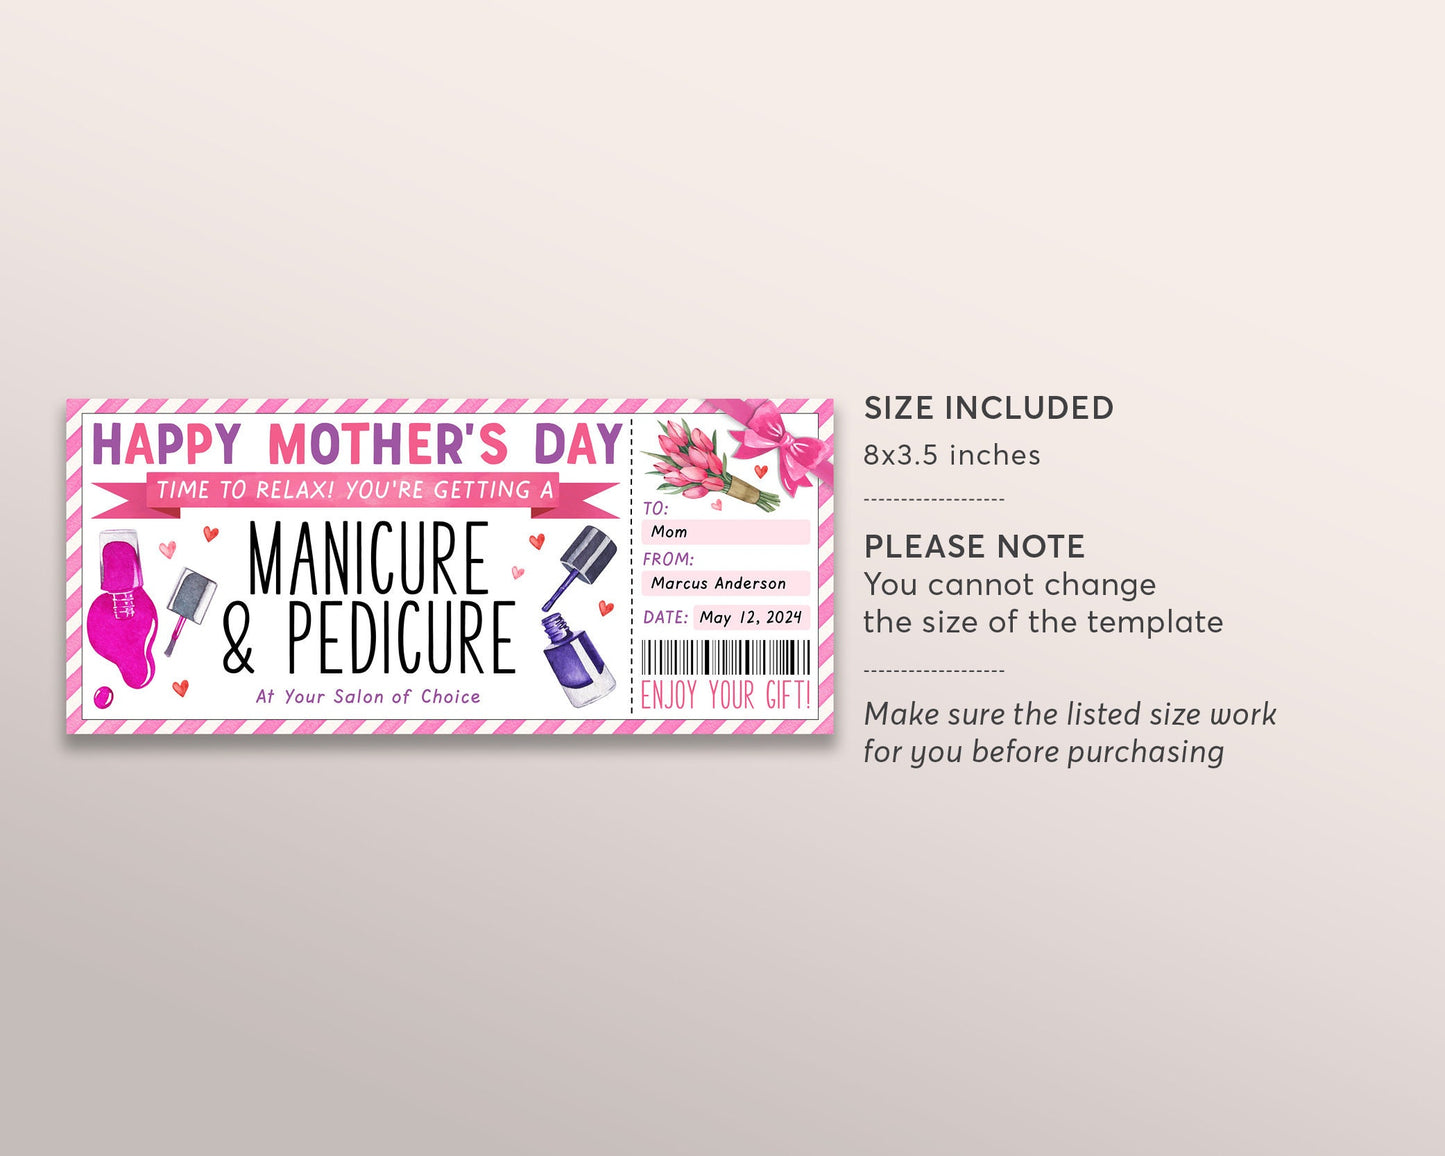 Mothers Day Mani Pedi Ticket Editable Template, Manicure Pedicure Gift Certificate For Mom, Nail Salon Spa Day Experience Voucher Coupon